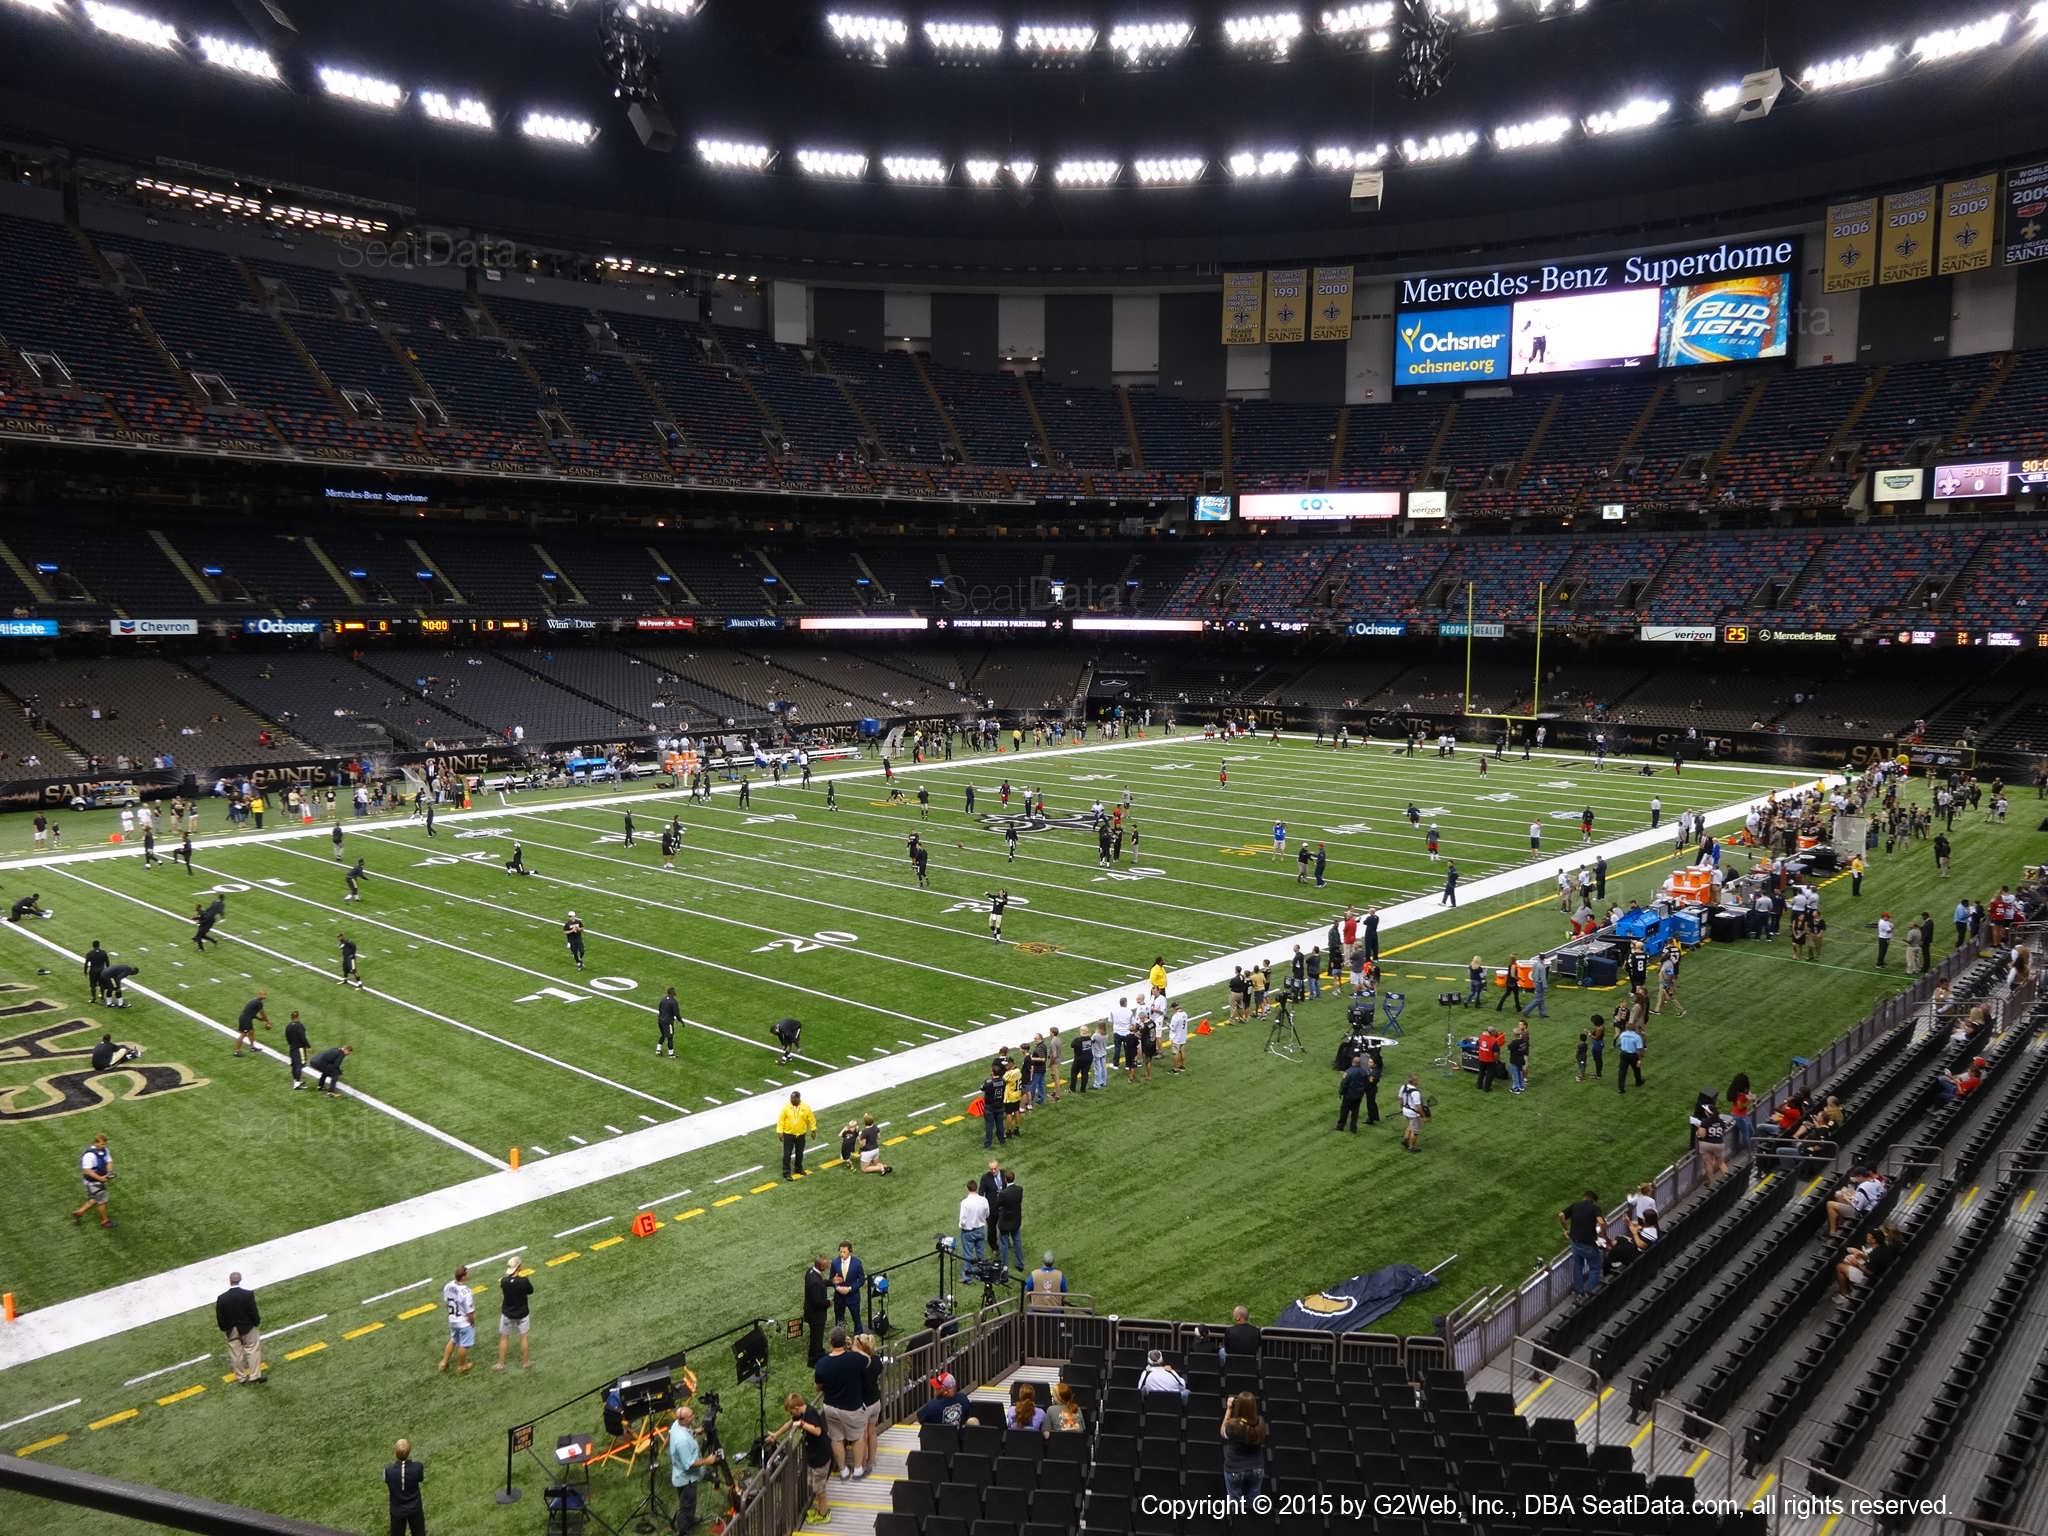 Seat view from section 233 at the Mercedes-Benz Superdome, home of the New Orleans Saints